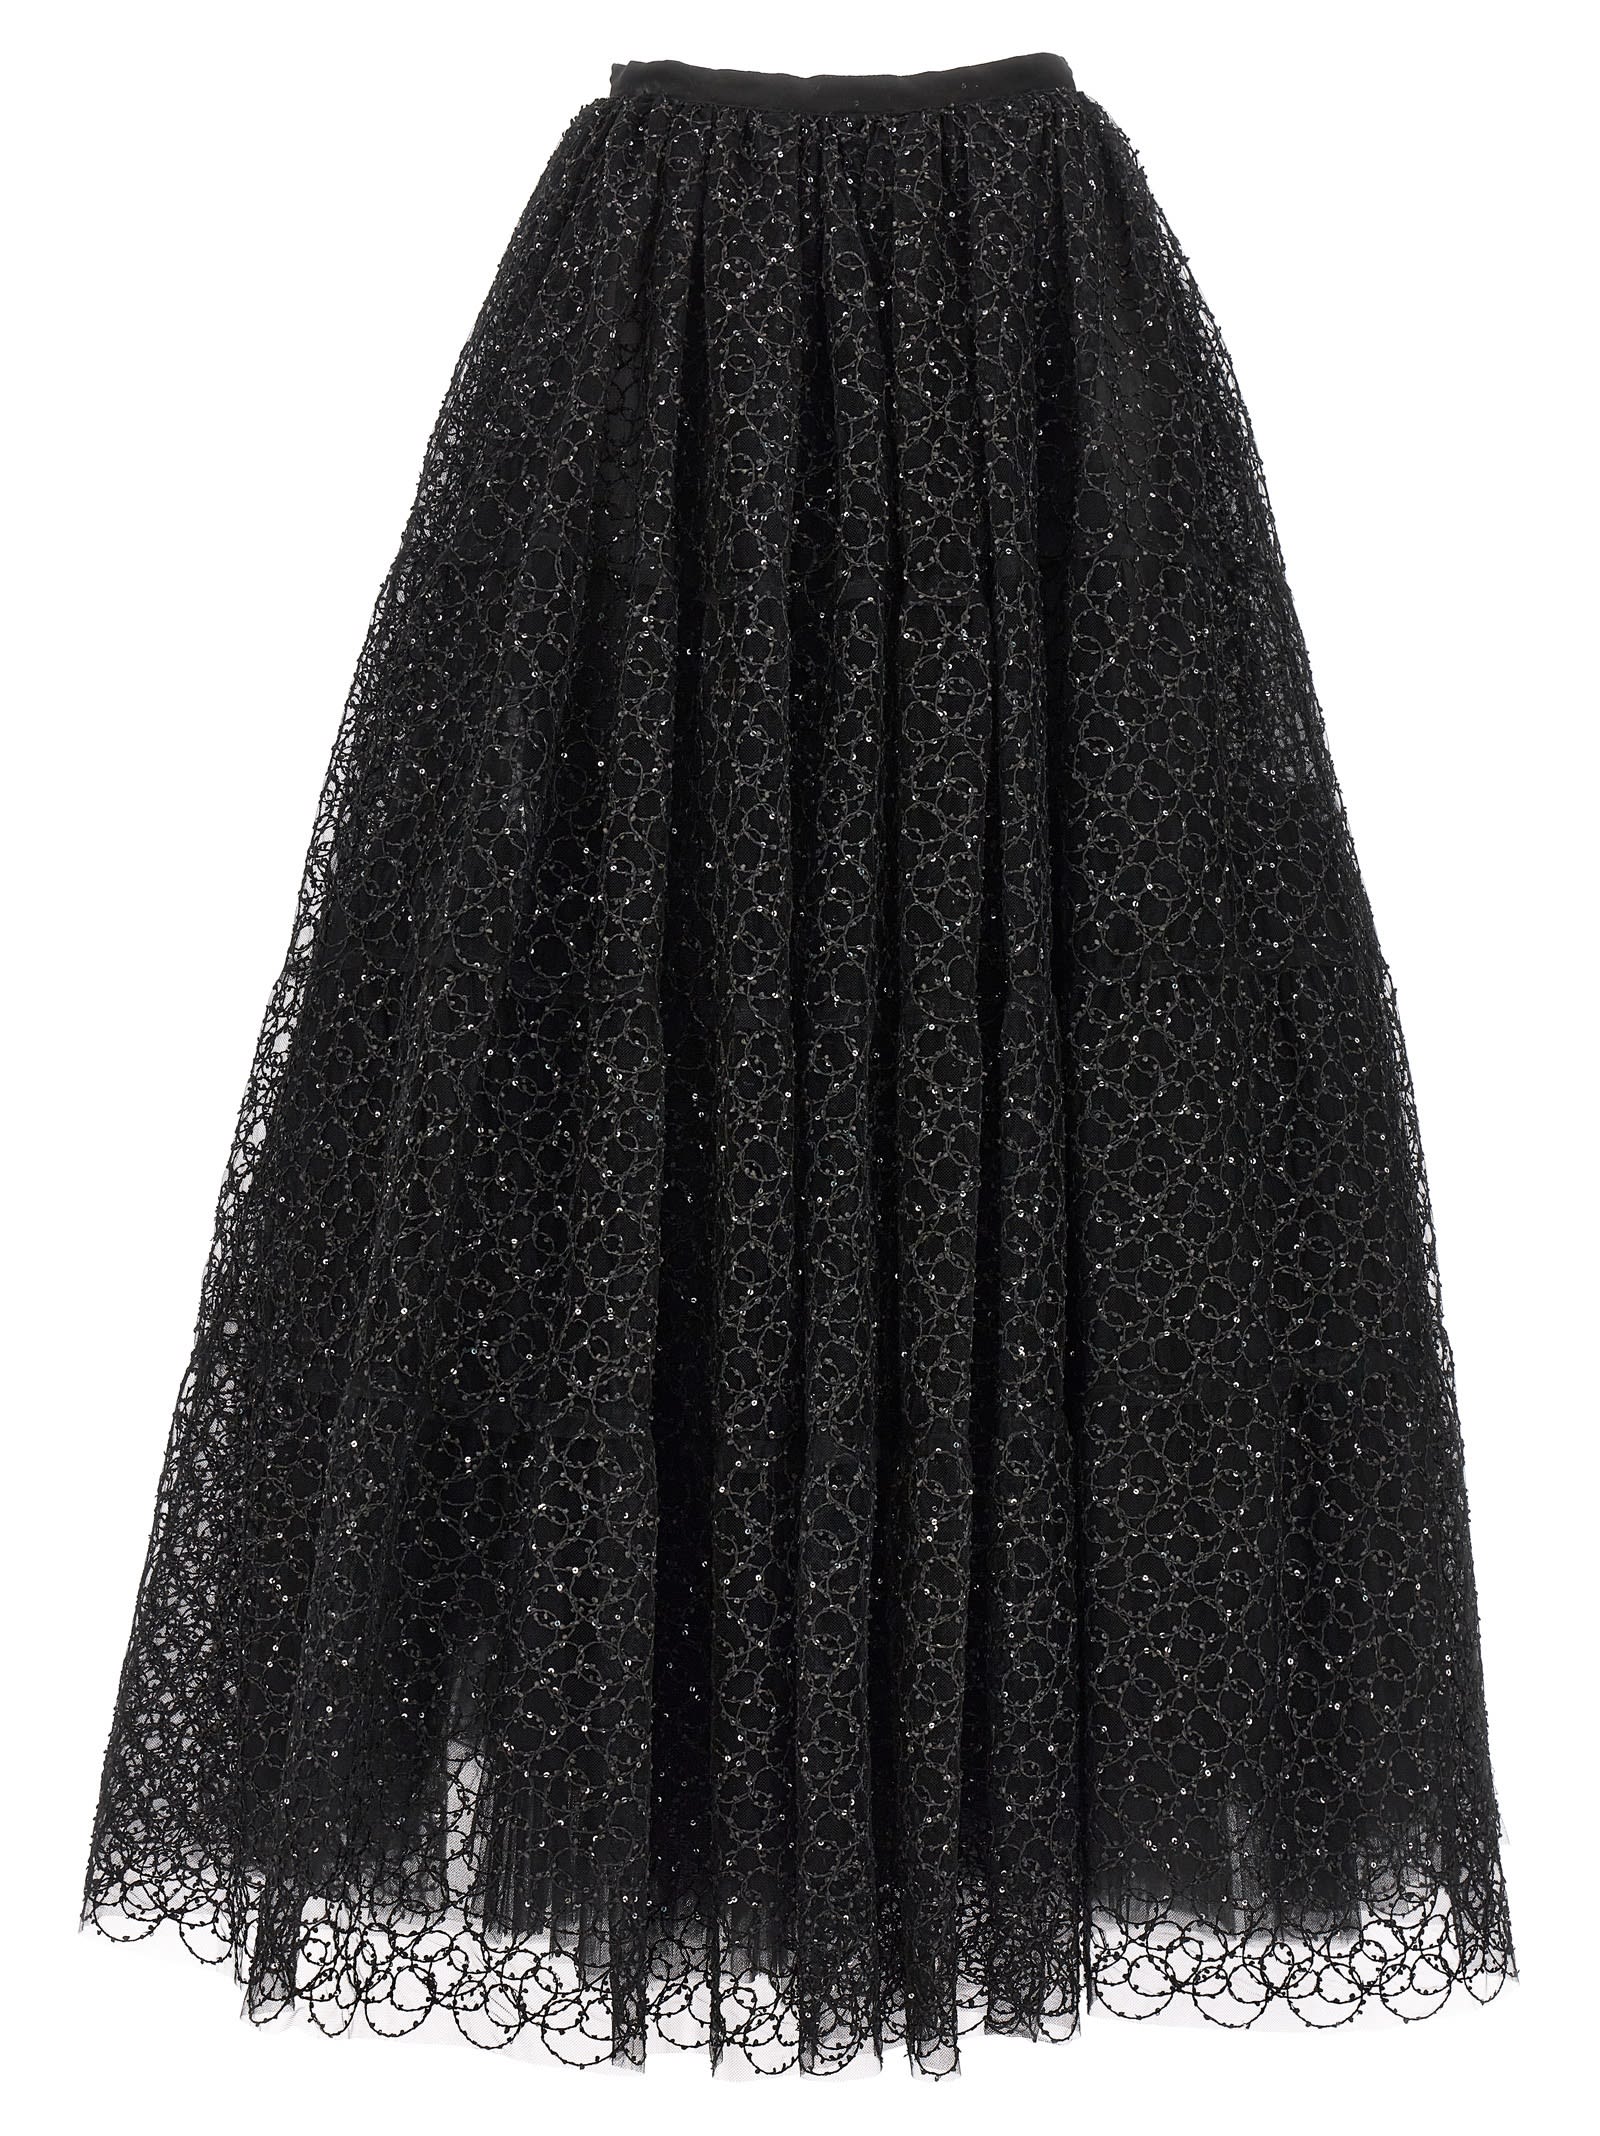 Embroidered Tulle Skirt